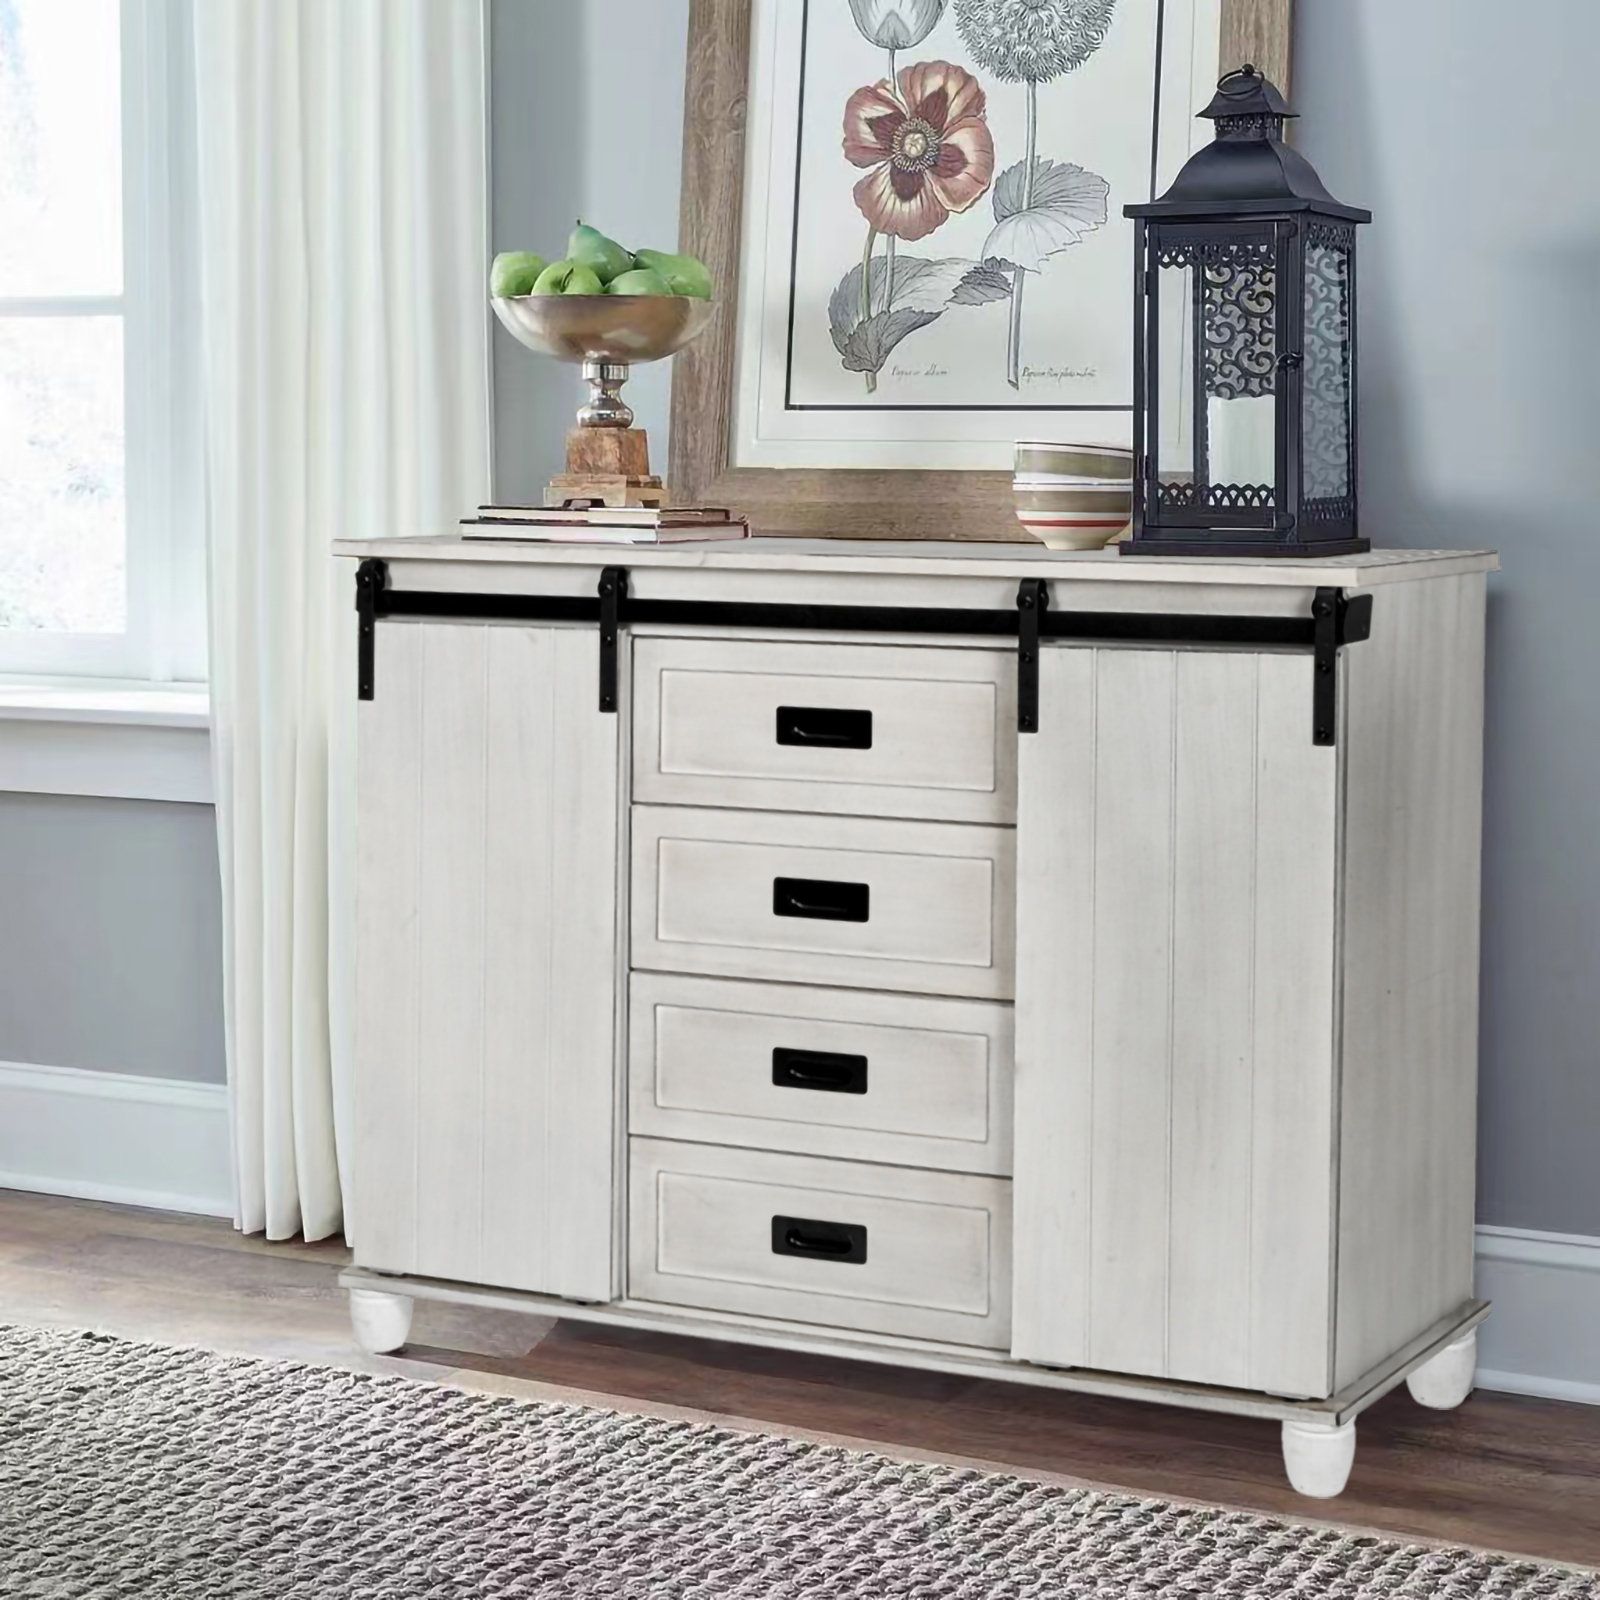 Gracie Oaks Redgate 45" Wide White Storage Cabinet Sideboard With 4 Drawers  And 2 Sliding Barn Doors & Reviews | Wayfair Inside Sideboards Double Barn Door Buffet (View 9 of 15)